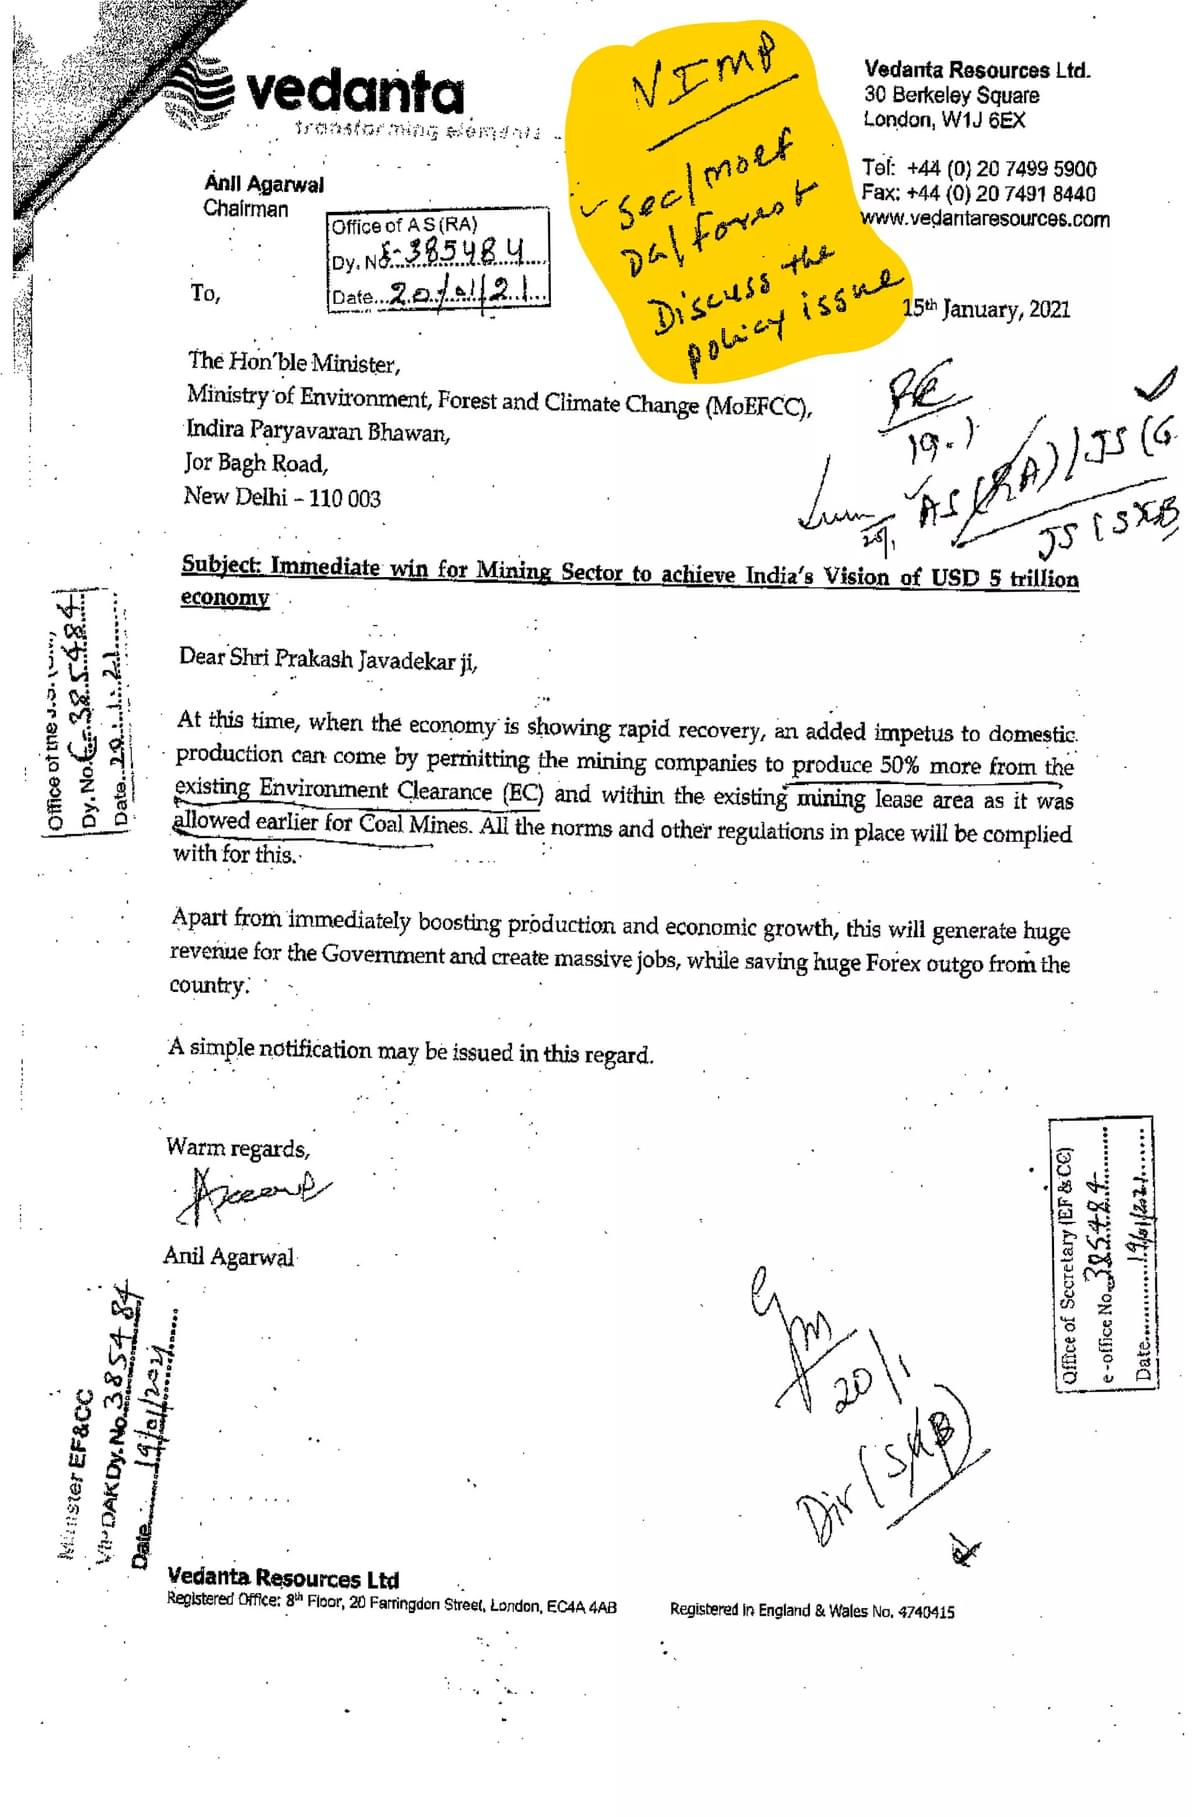 investigations/anil-agarwal-FICCI-letters-page425.jpg